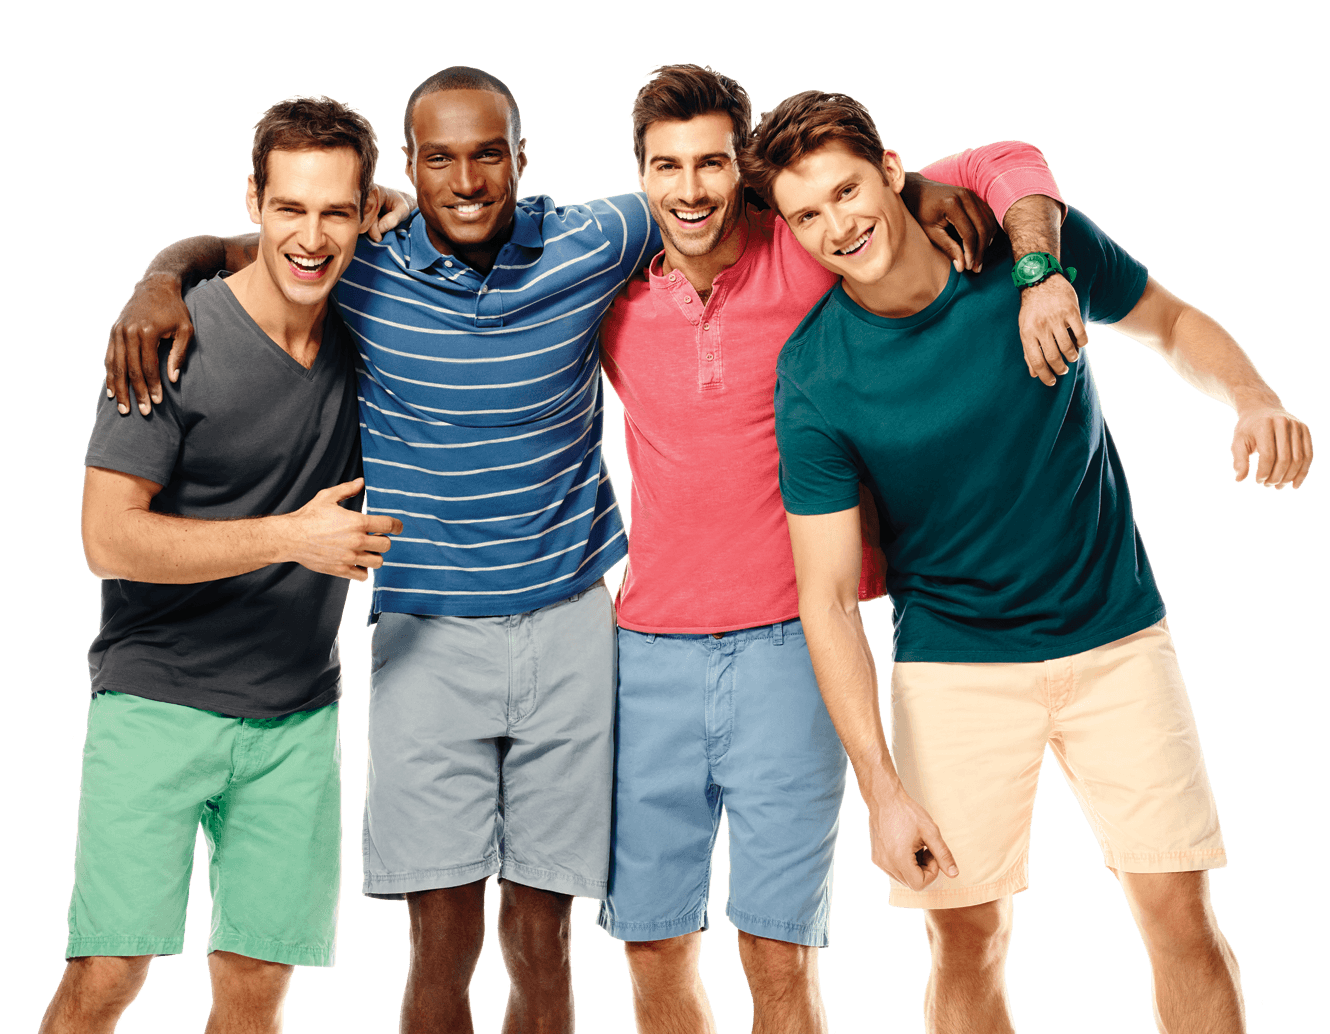 Group Of Men Png - Group Of Men Png Hdpng.com 1330, Transparent background PNG HD thumbnail